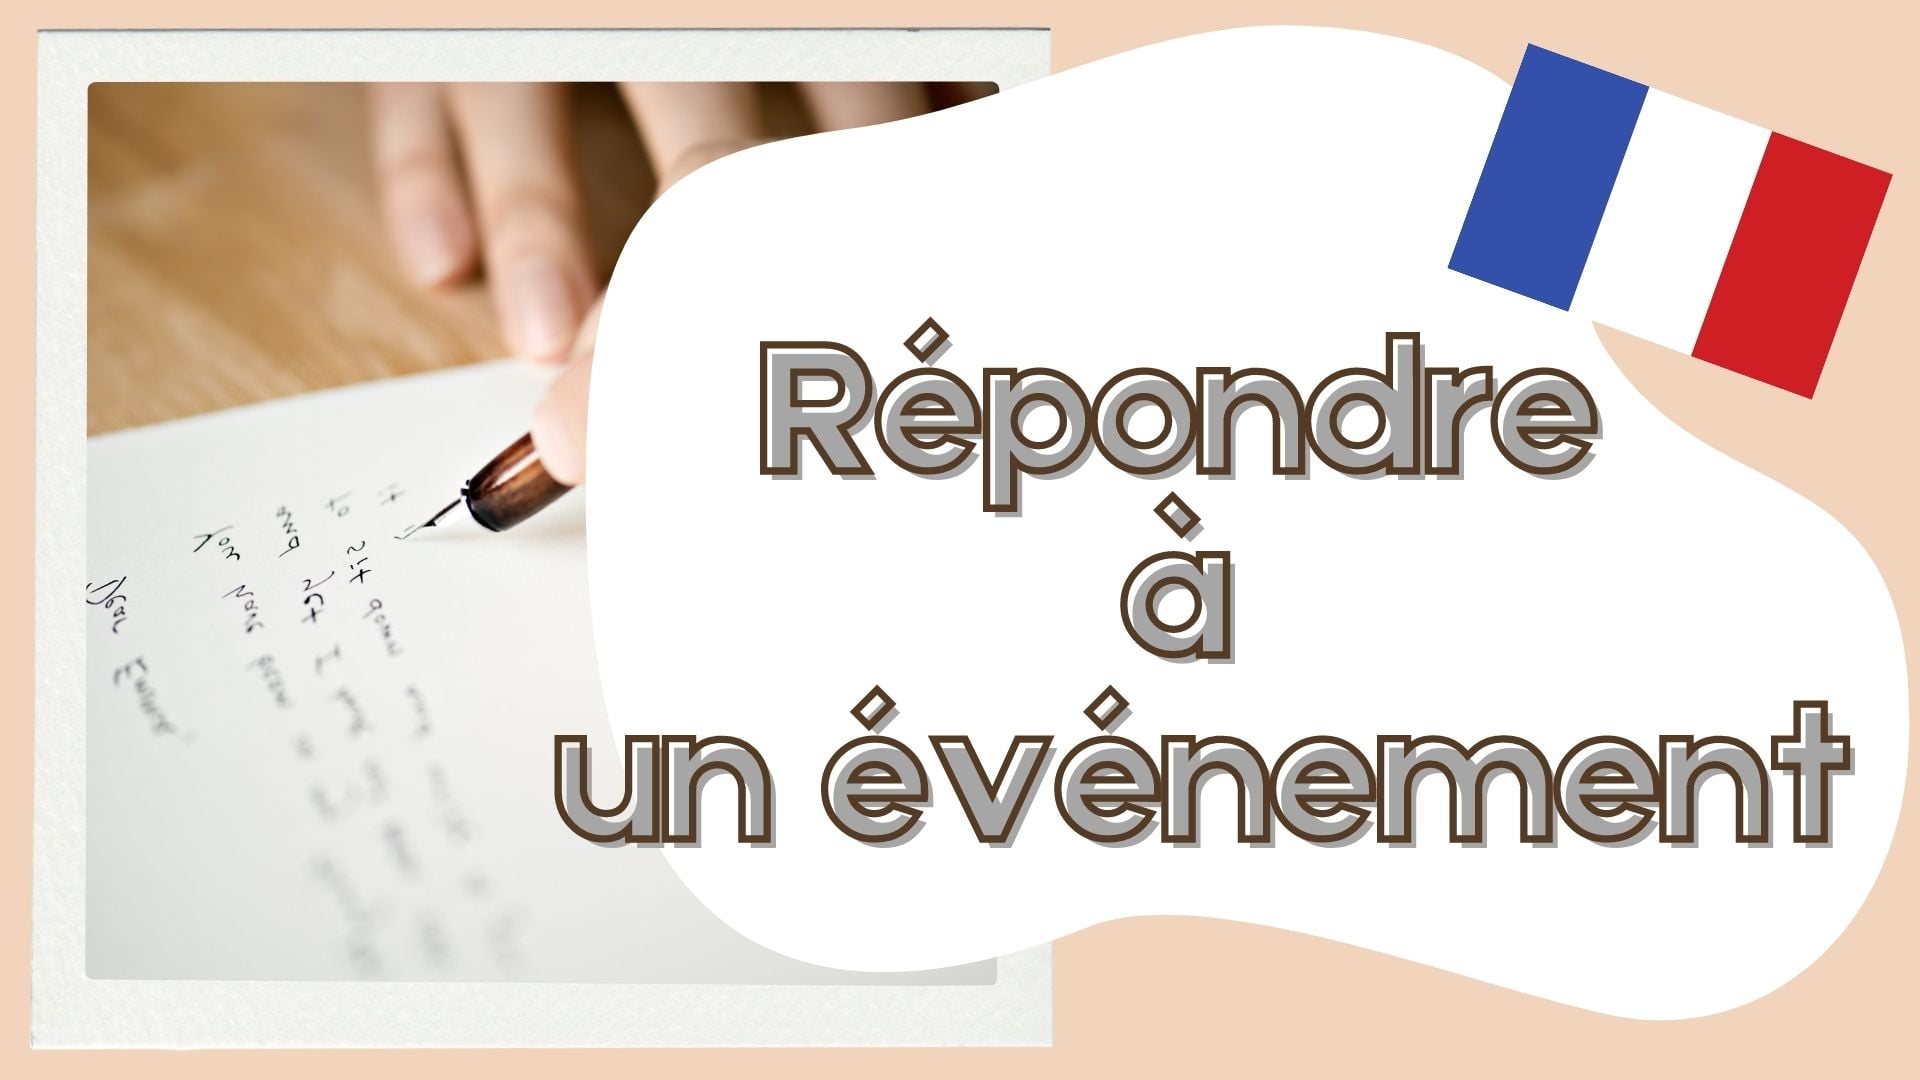 respond to an event in French